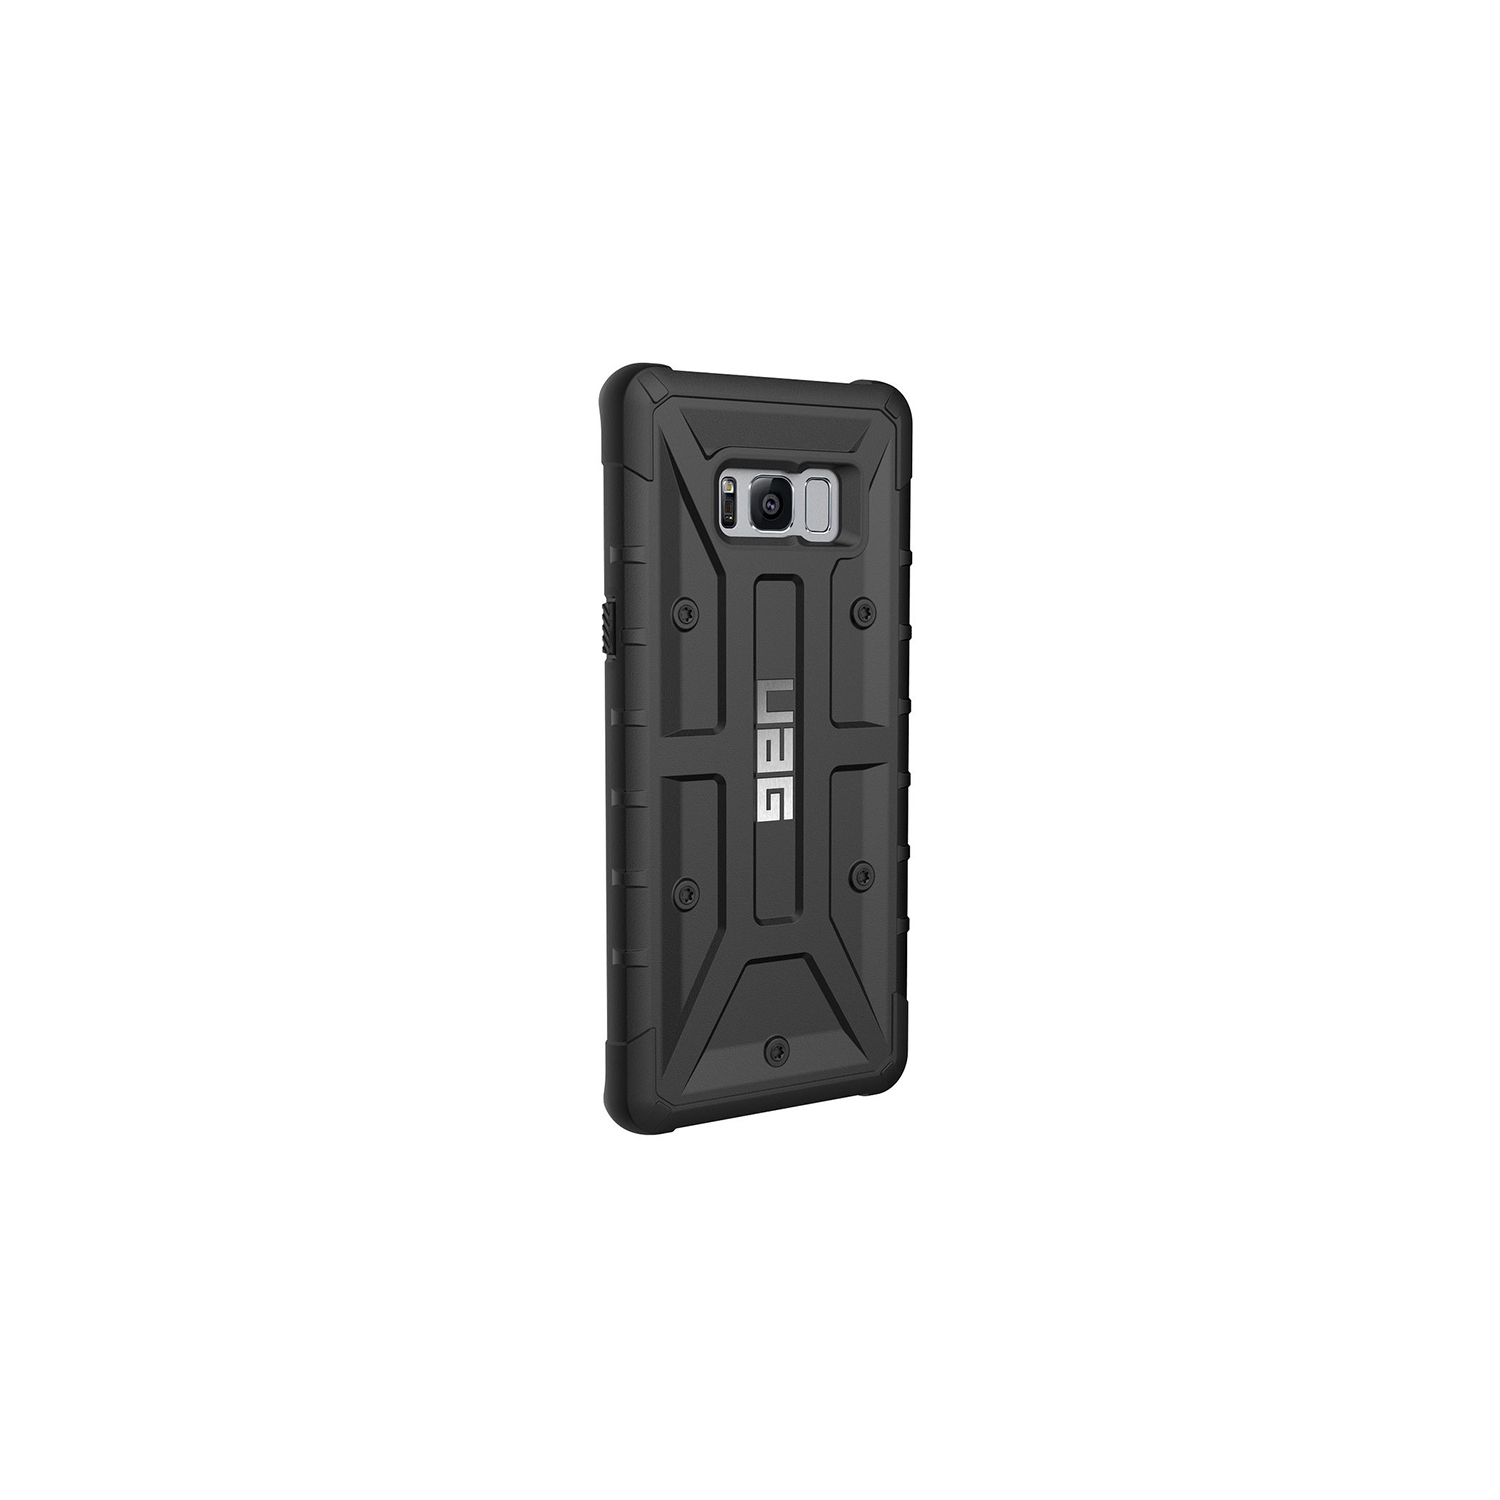 UAG Fitted Hard Shell Case for Samsung Galaxy S8 Plus - Black